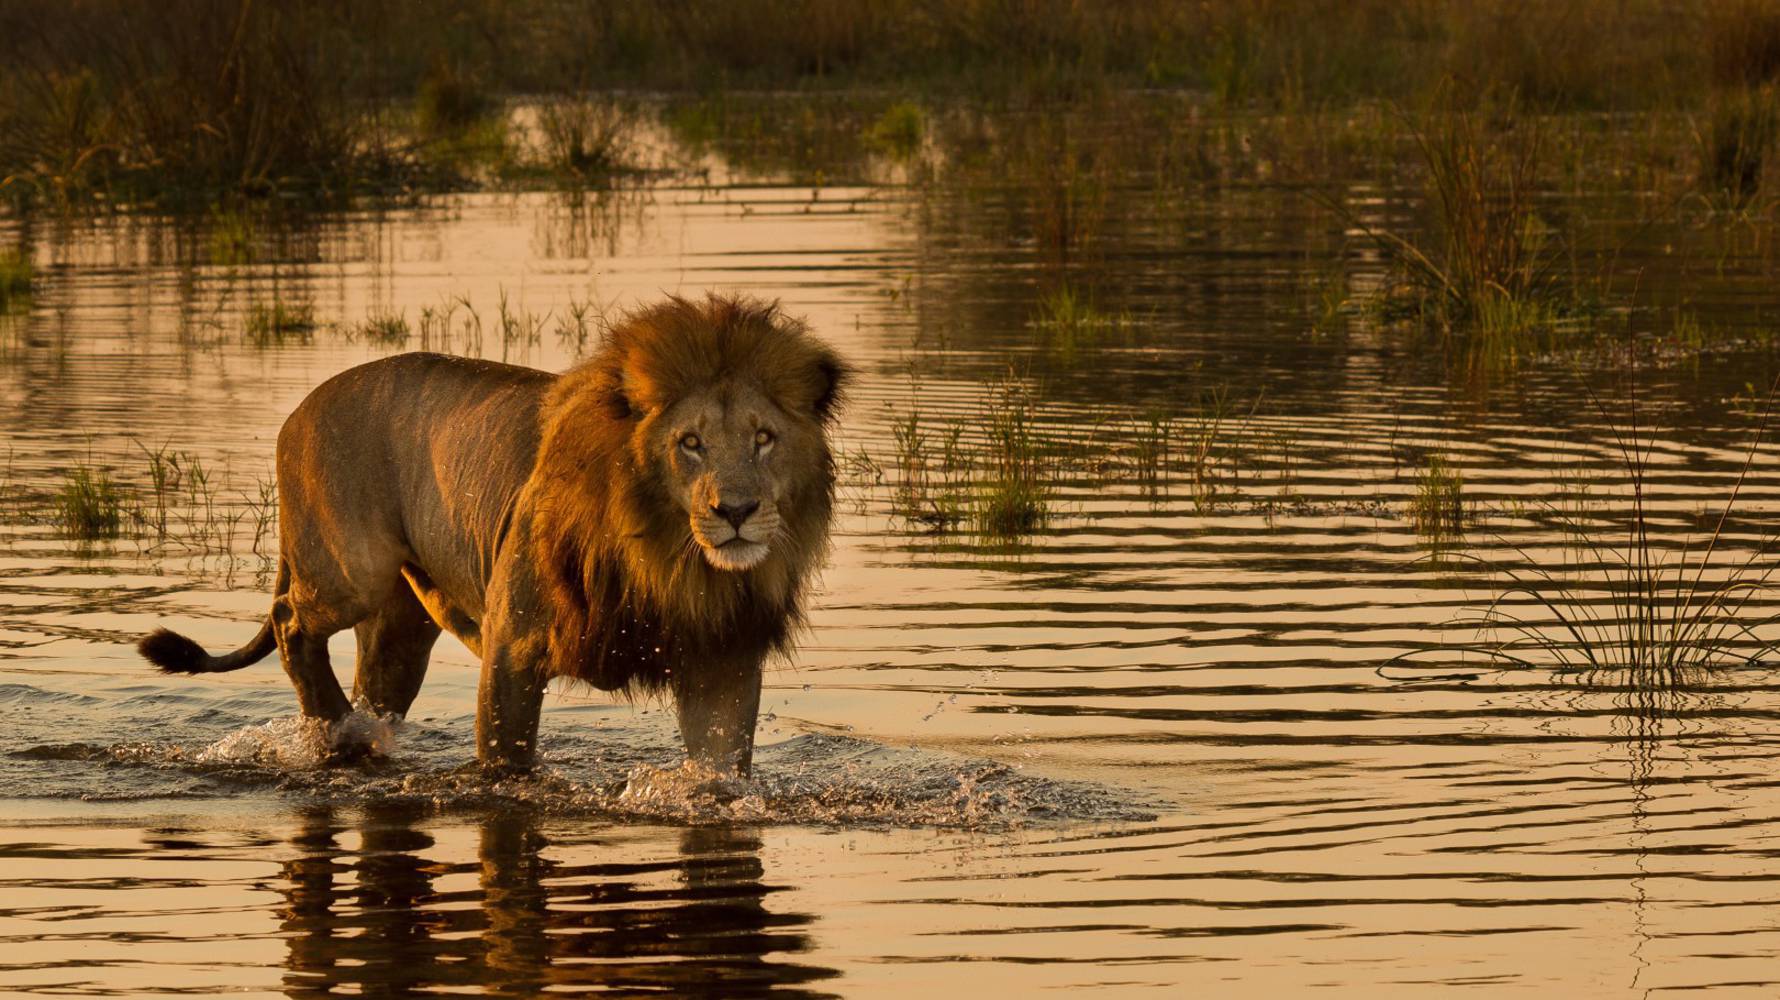 Male_lion_in_water_(Large)